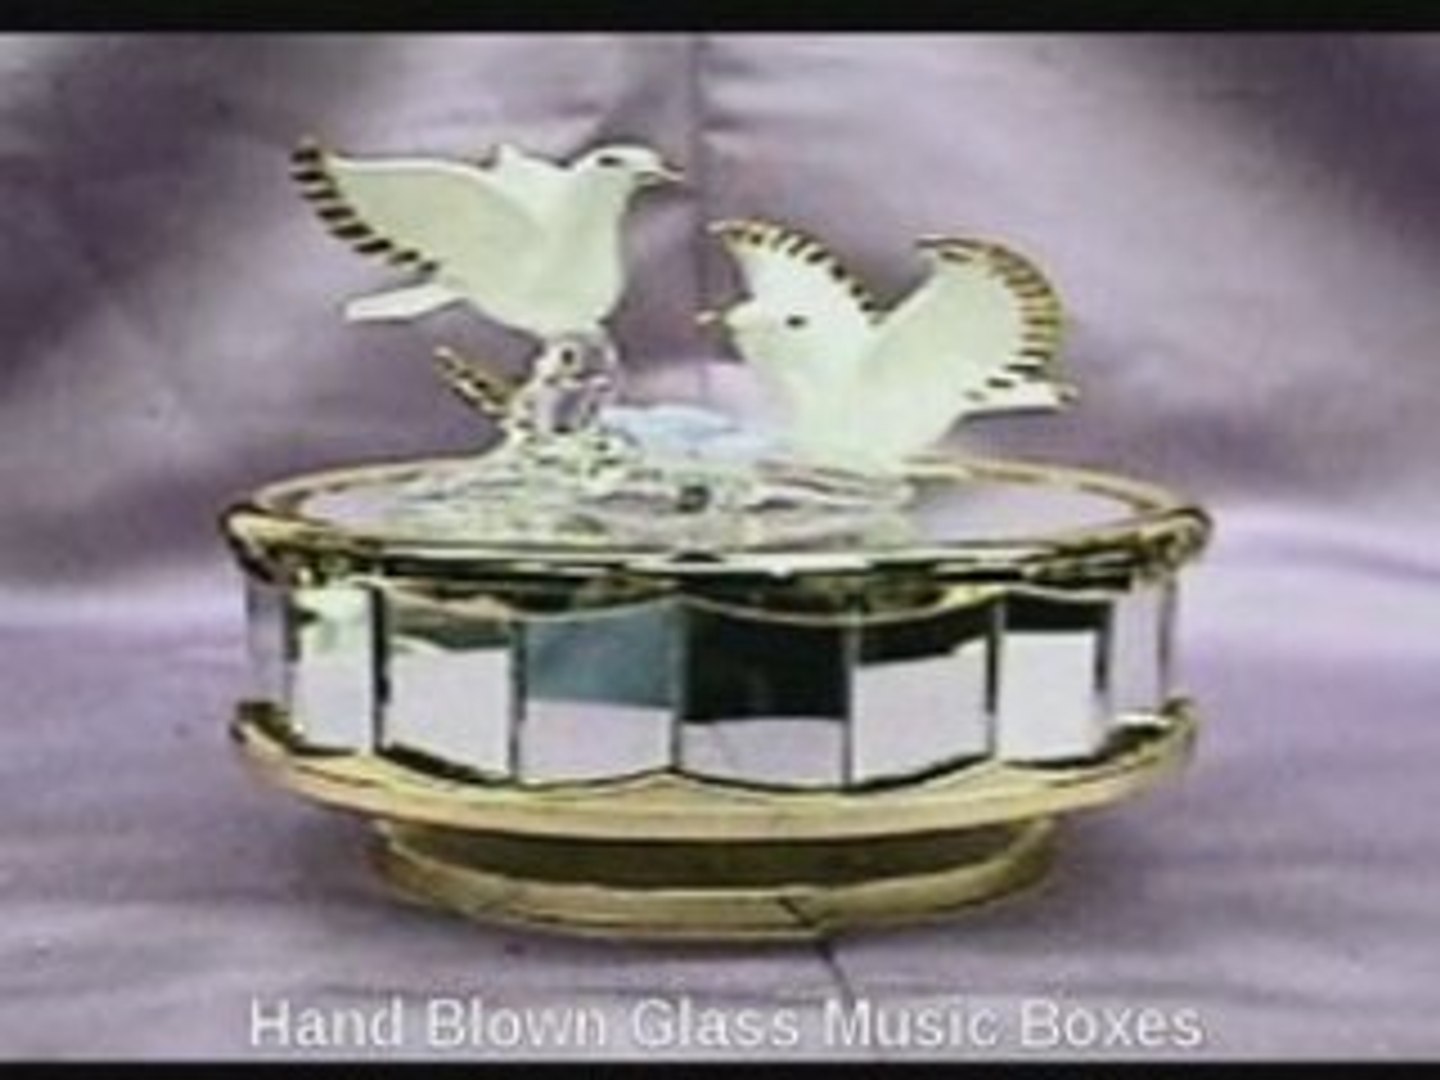 Music Boxes - Custom Music Boxes